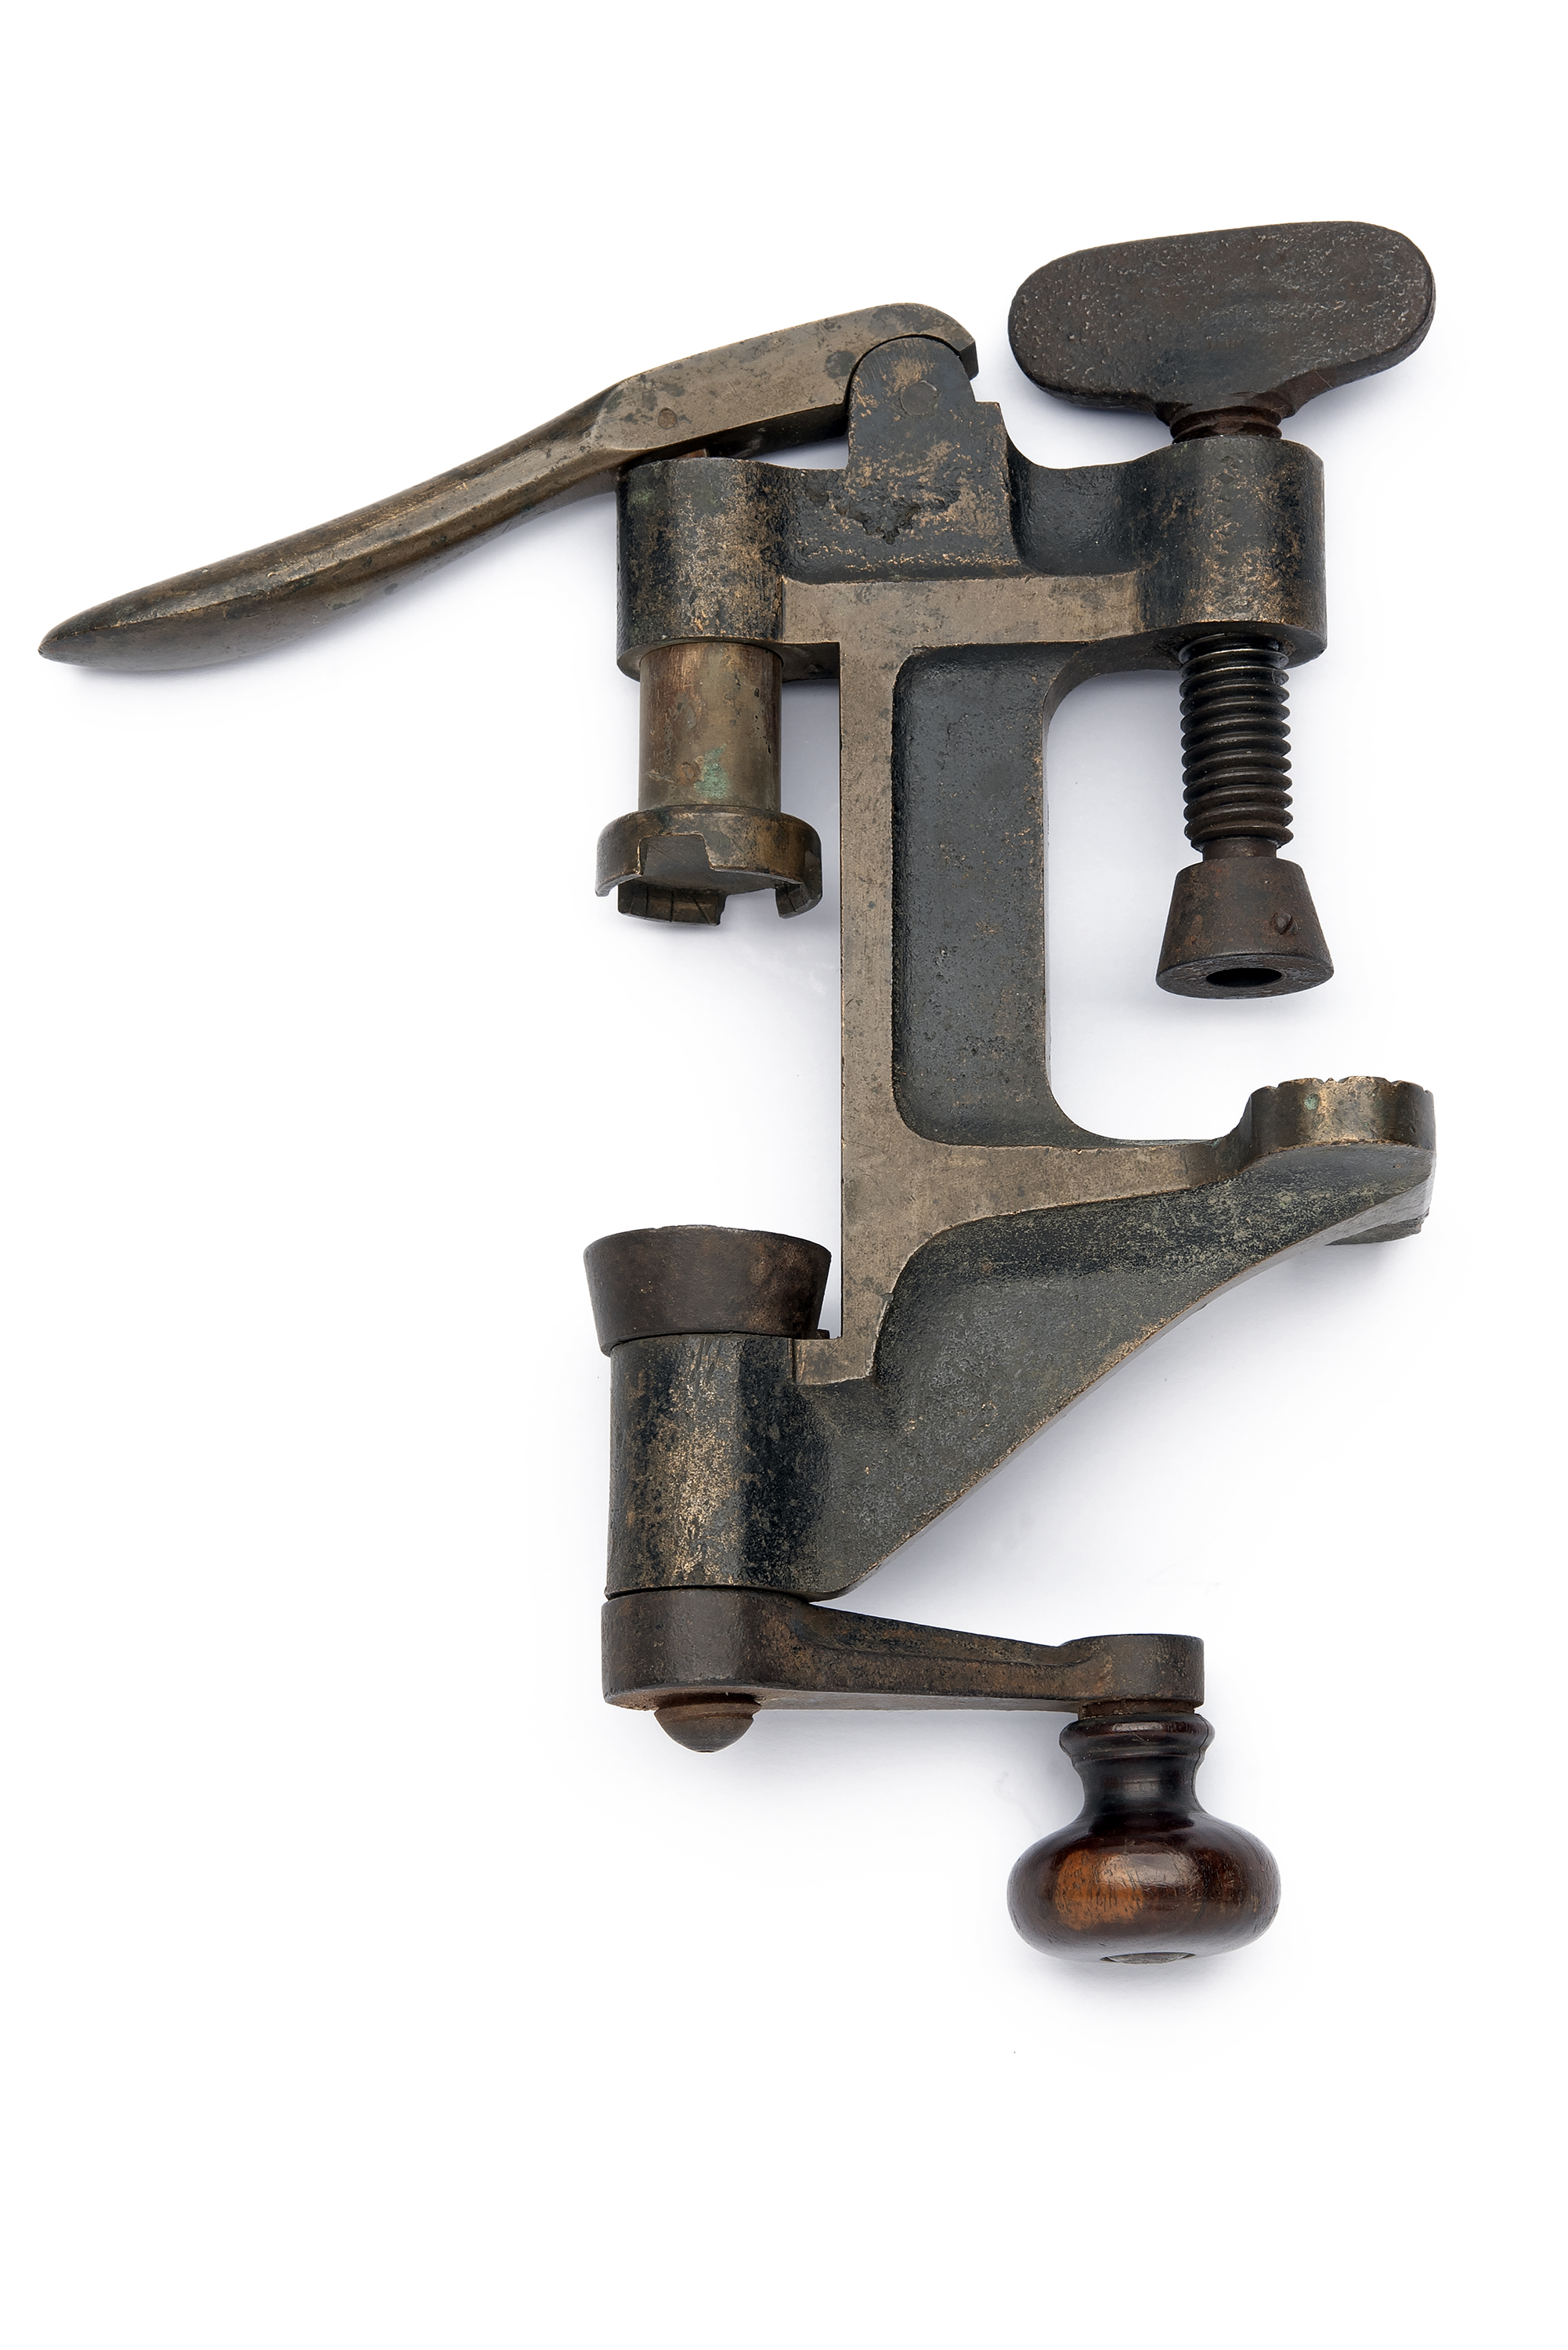 A RARE THOMAS HORSLEY PATENT 12-BORE ROLL-TURNOVER TOOL, mid-19th Century, cast brass, stamped 'T.